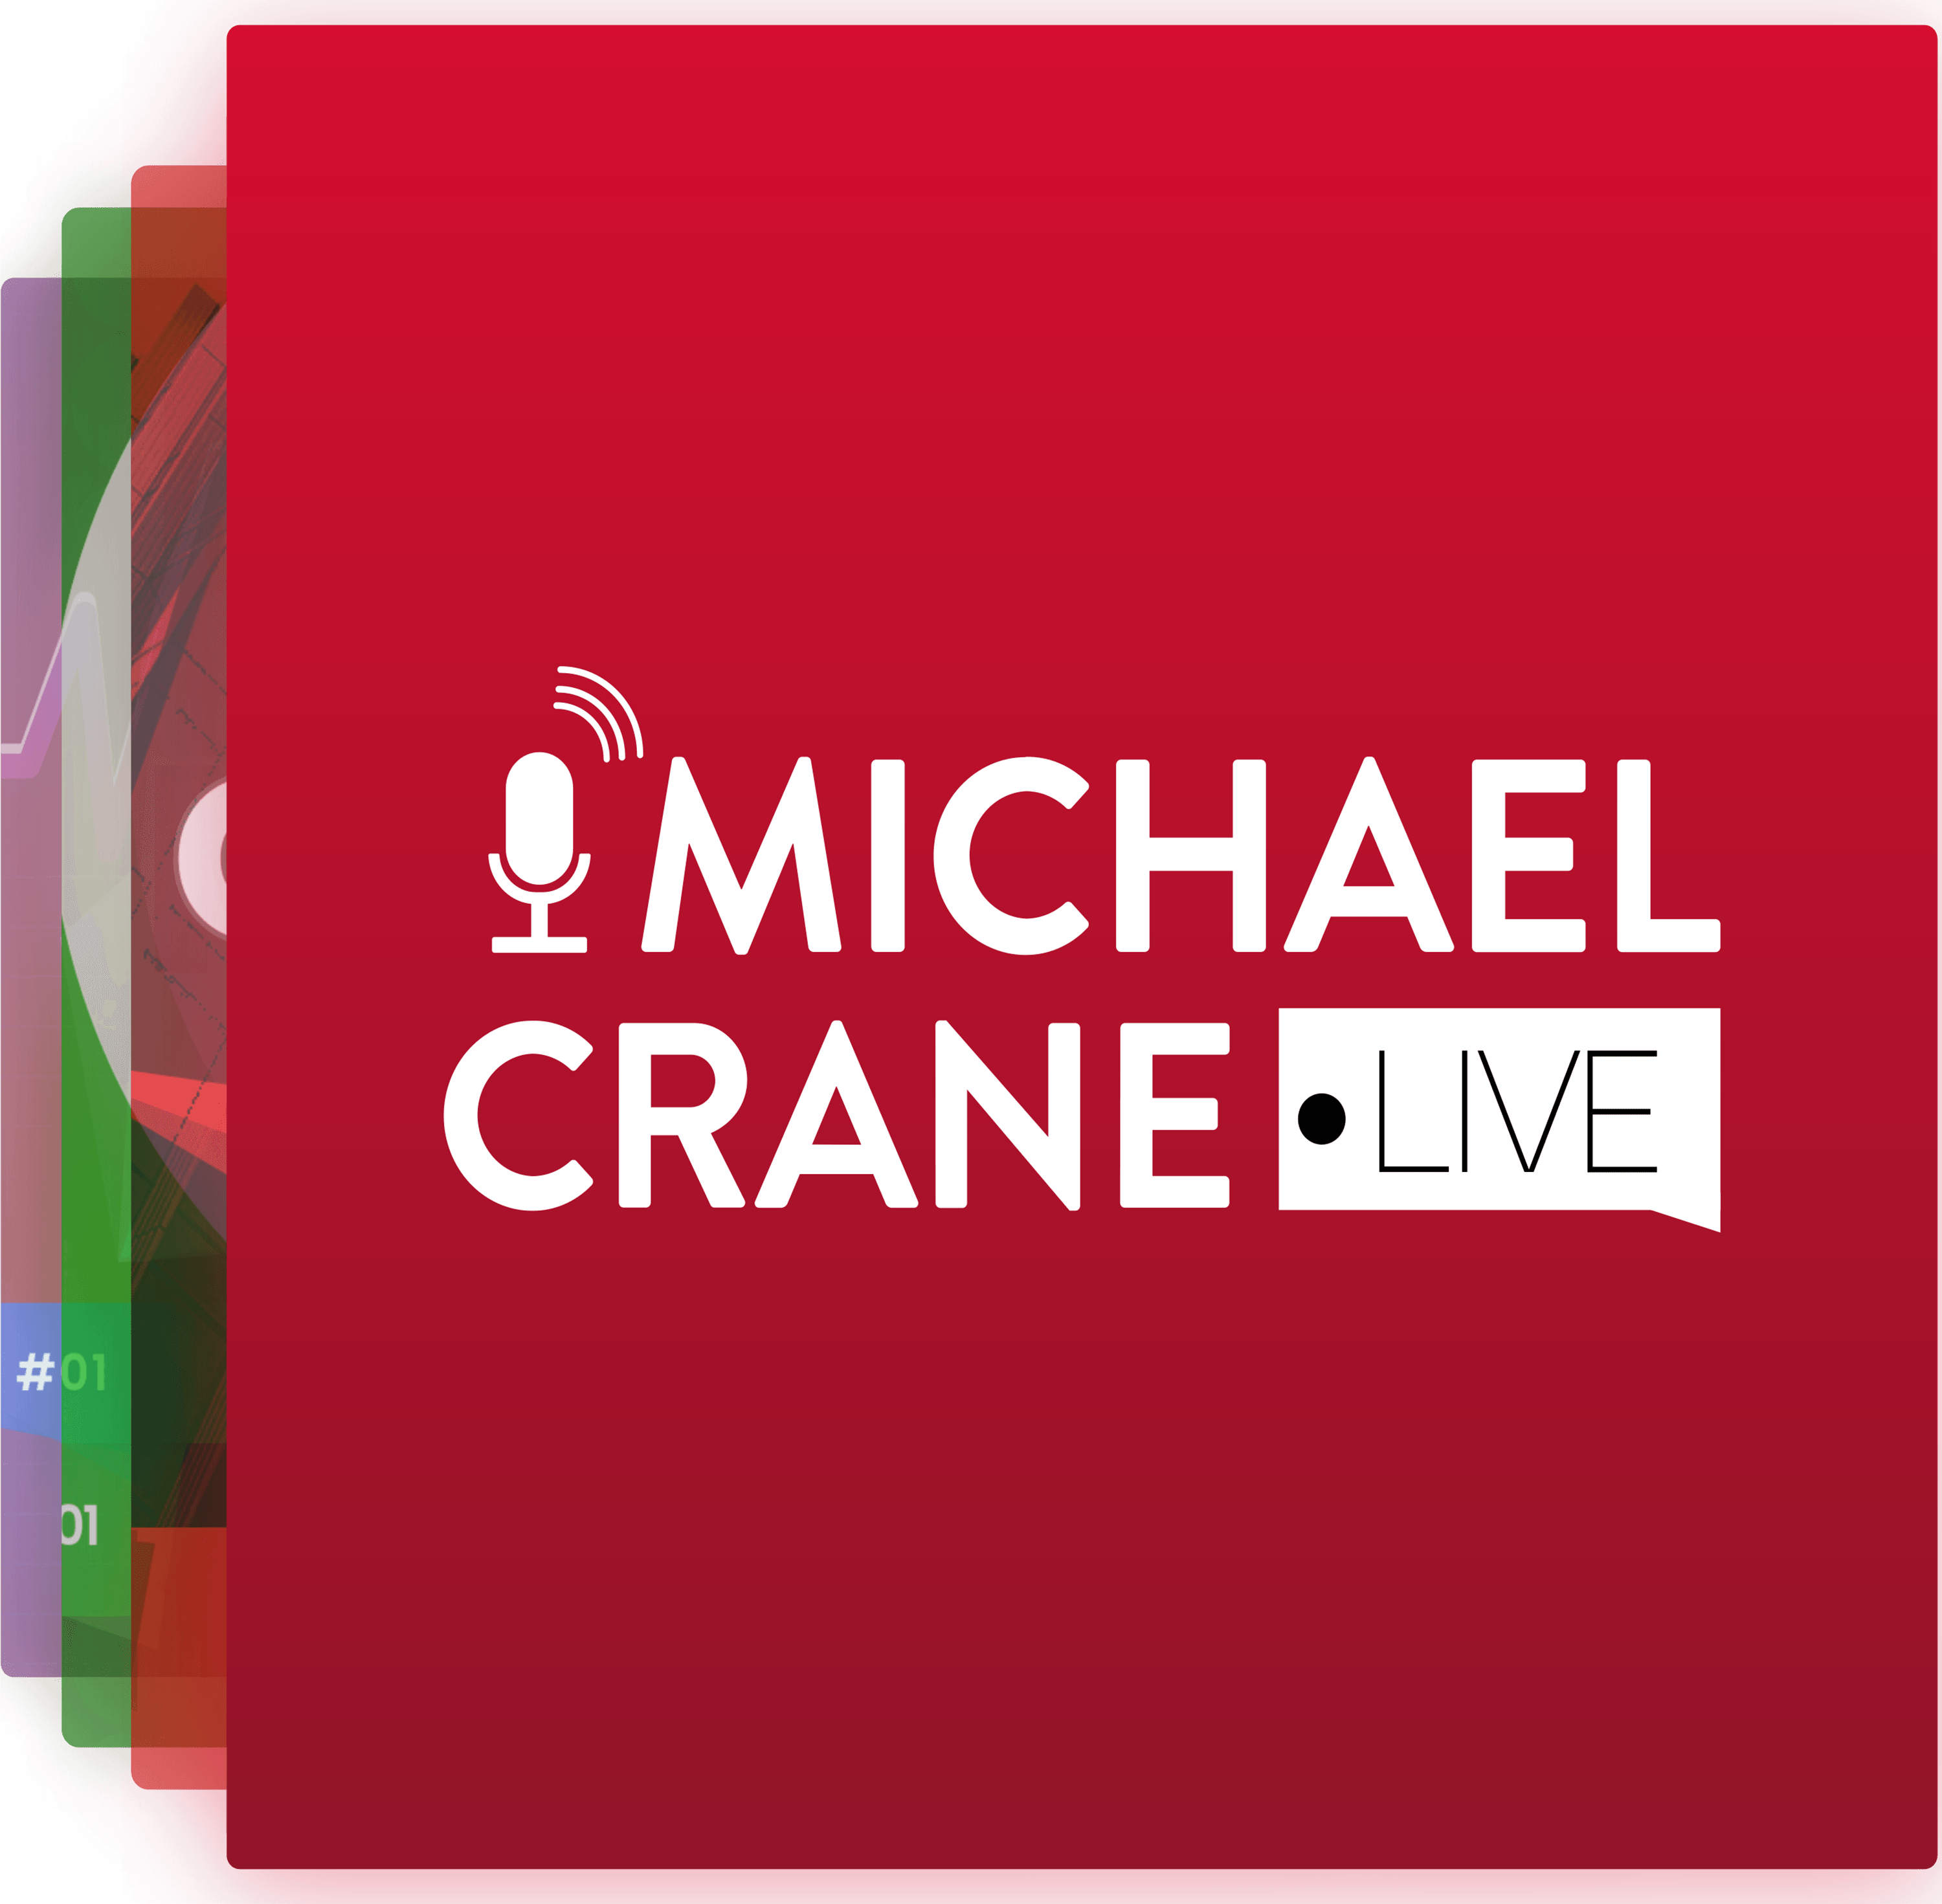 Michael Crane Live: Business Tips and Inspiration